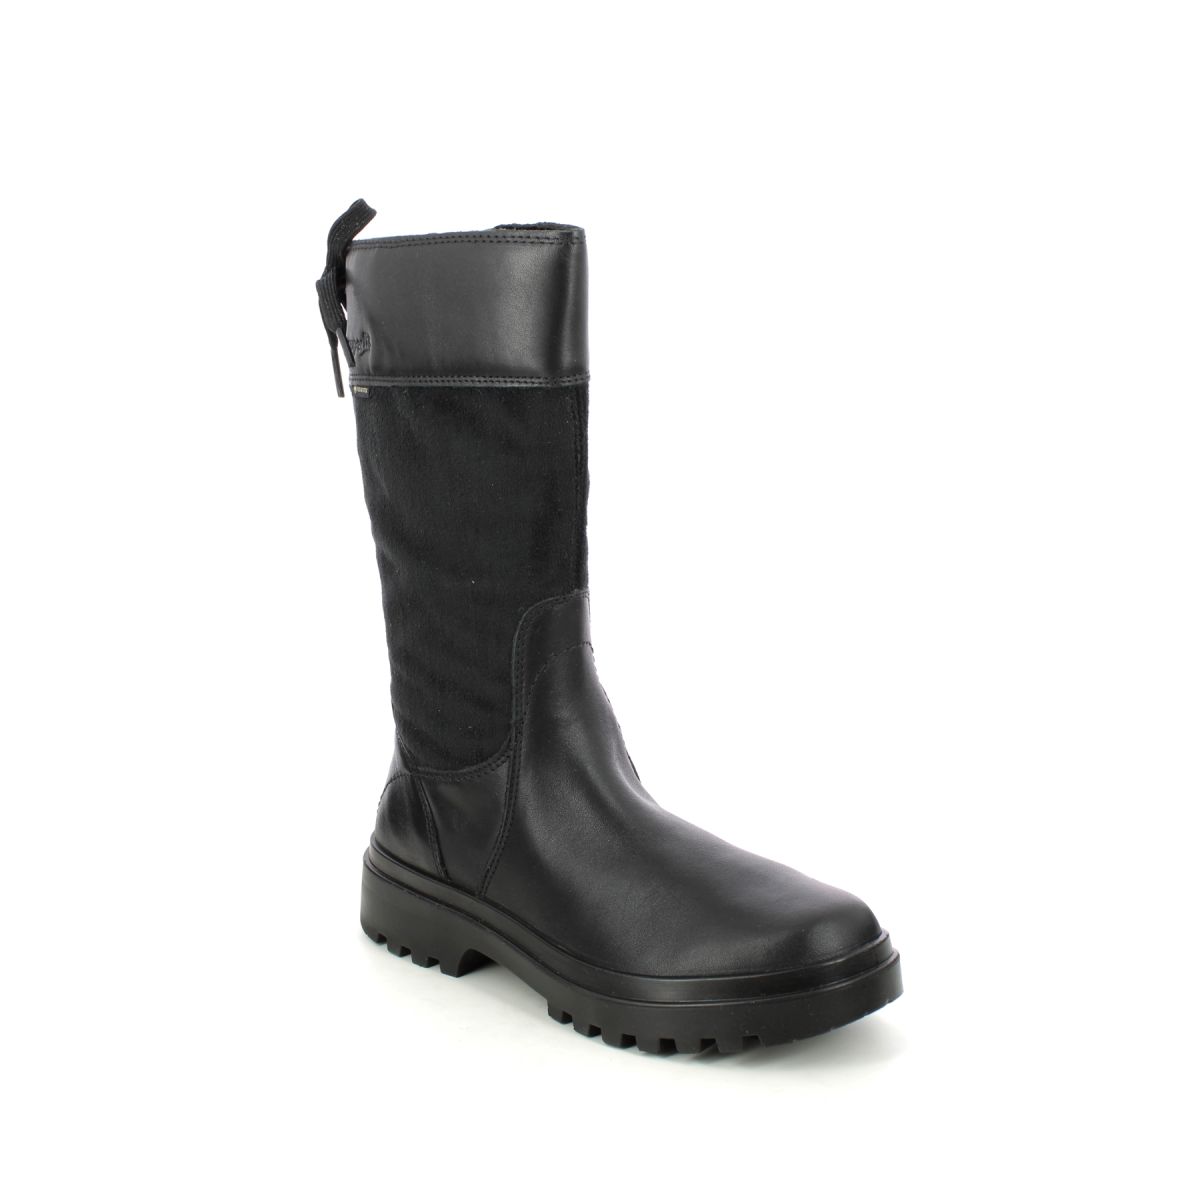 Superfit Abby Long Gtx Black Leather Kids Girls Boots 1000605-0000 In Size 36 In Plain Black Leather For kids